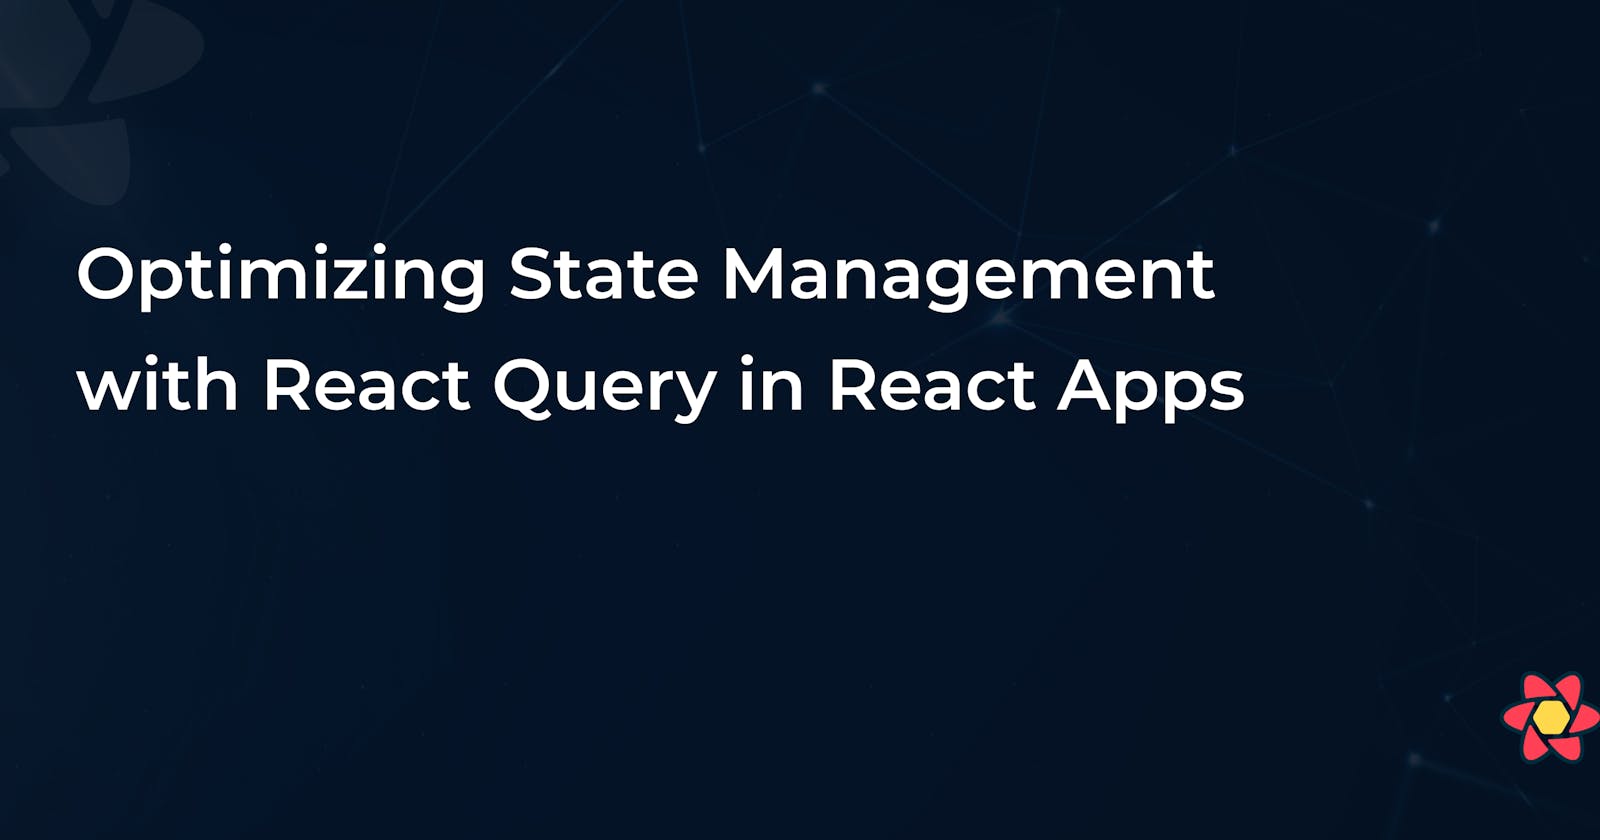 Optimizing State Management with React Query in React Apps